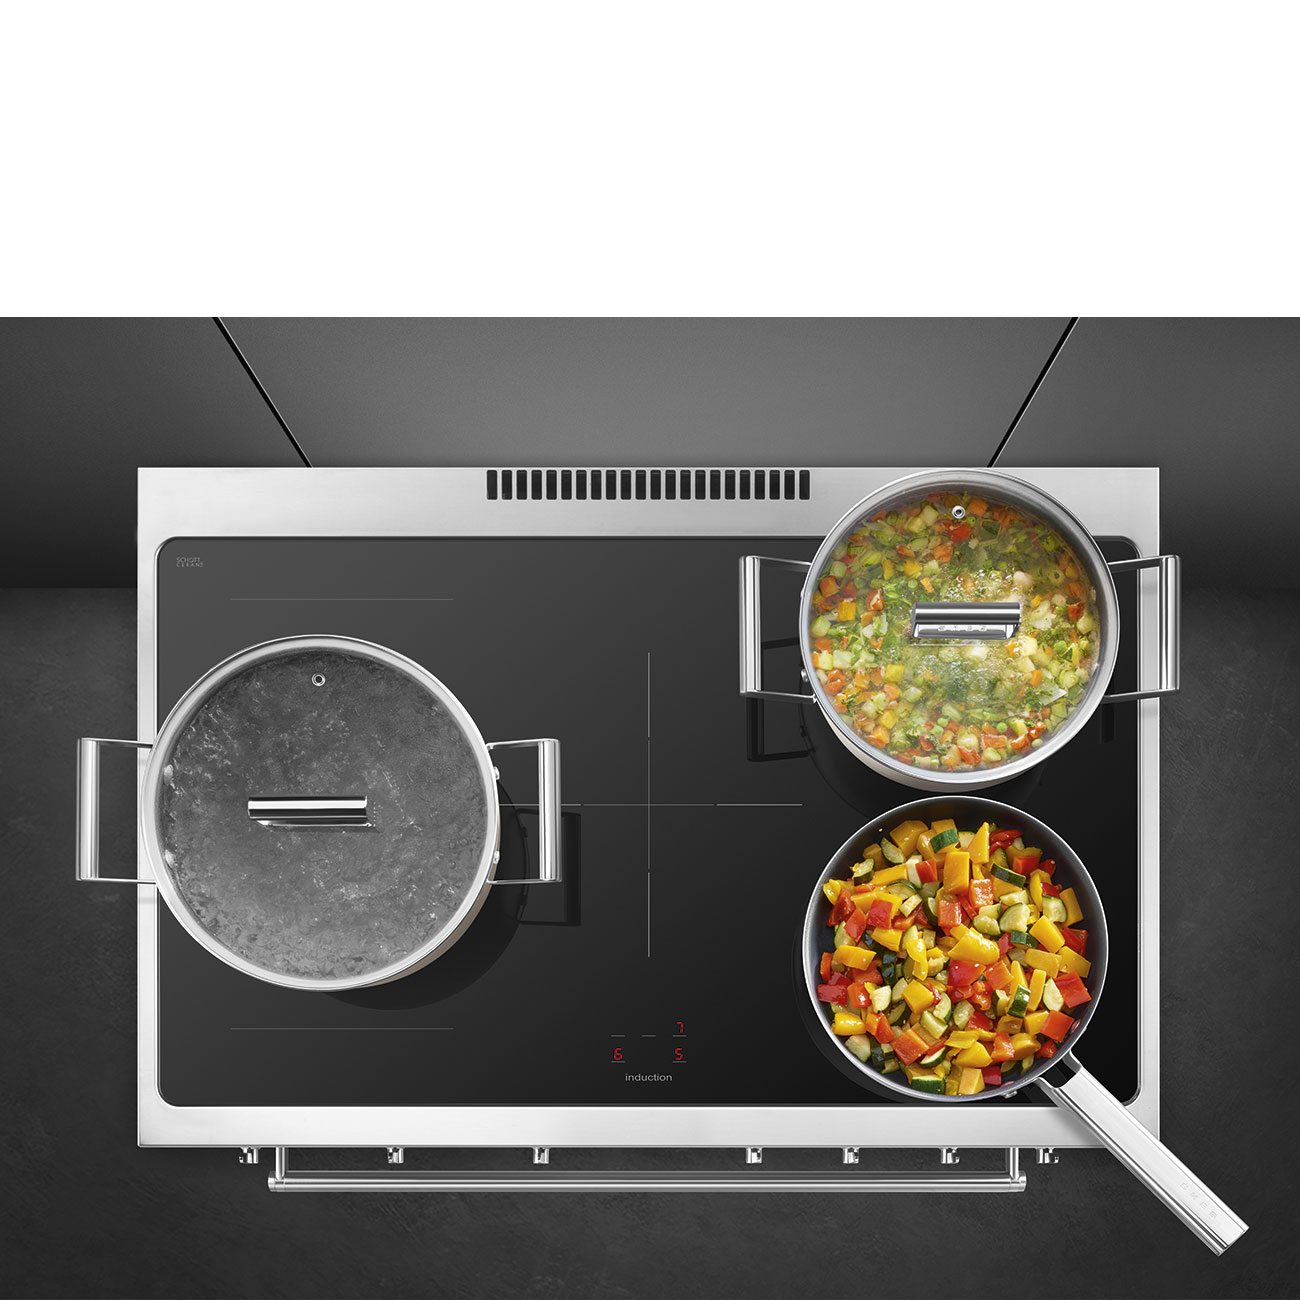 Smeg Stainless steel Cooker with Induction Hob_9